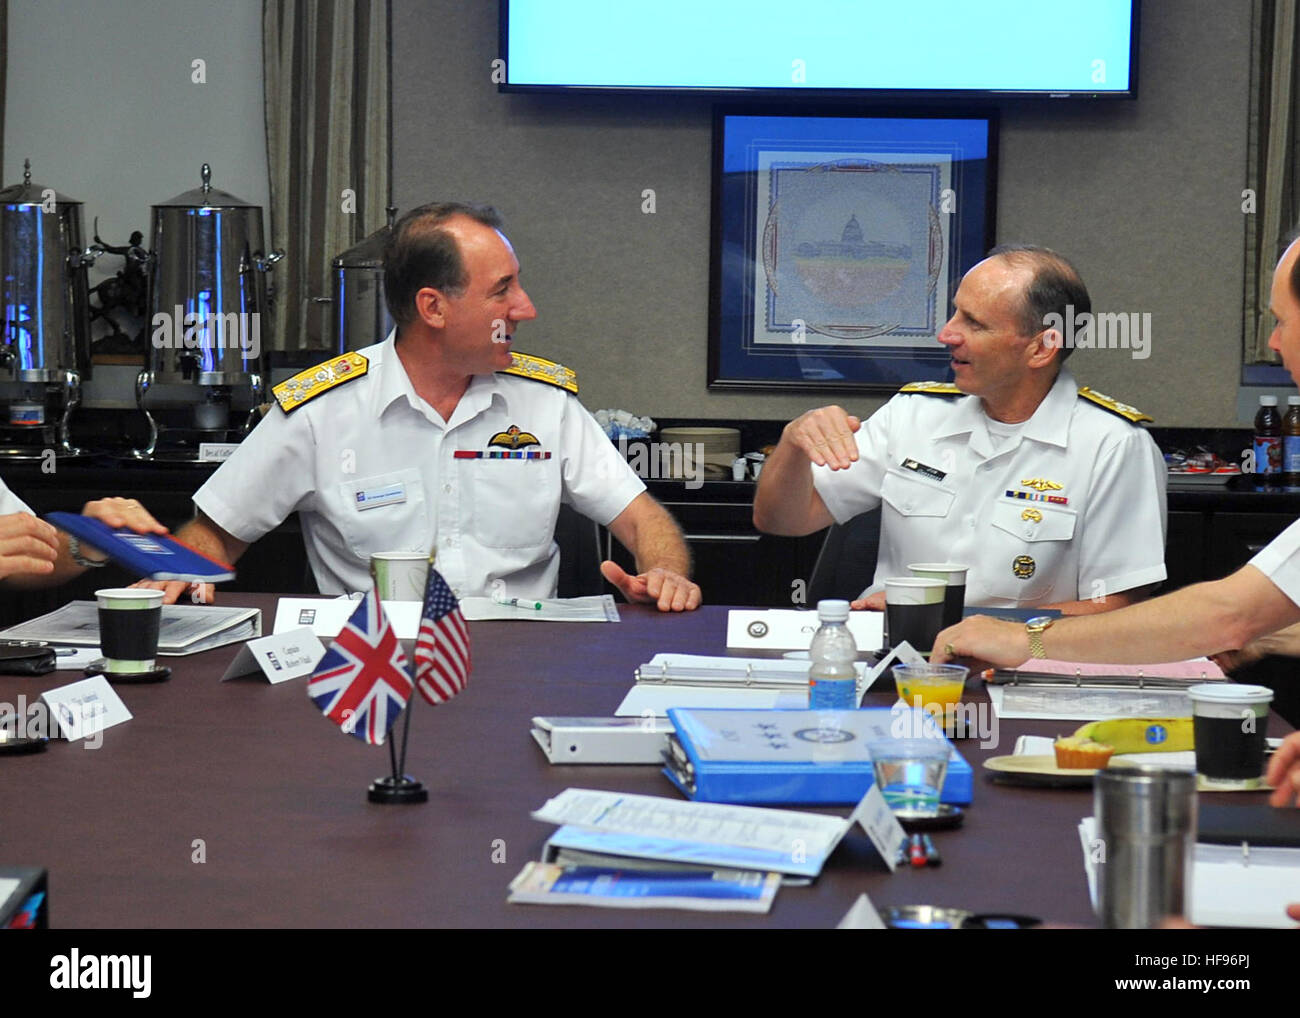 130606-N-ZI511-234.WASHINGTON (June 6, 2013) Chief of Naval Operations (CNO) Adm. Jonathan Greenert meets with First Sea Lord Adm. Sir George Zambellas during United States and United Kingdom staff talks at National Defense University. Greenert and Zambellas along with 30 other U.S. Navy and Royal Navy officers met to discuss issues of mutual concern and the maritime challenges both nations face in the future. (U.S. Navy photo by Chief Mass Communication Specialist Julianne Metzger/Released). Chief of U.S. Naval Operations Adm. Jonathan Greenert, right, speaks with British Royal Navy First Sea Stock Photo